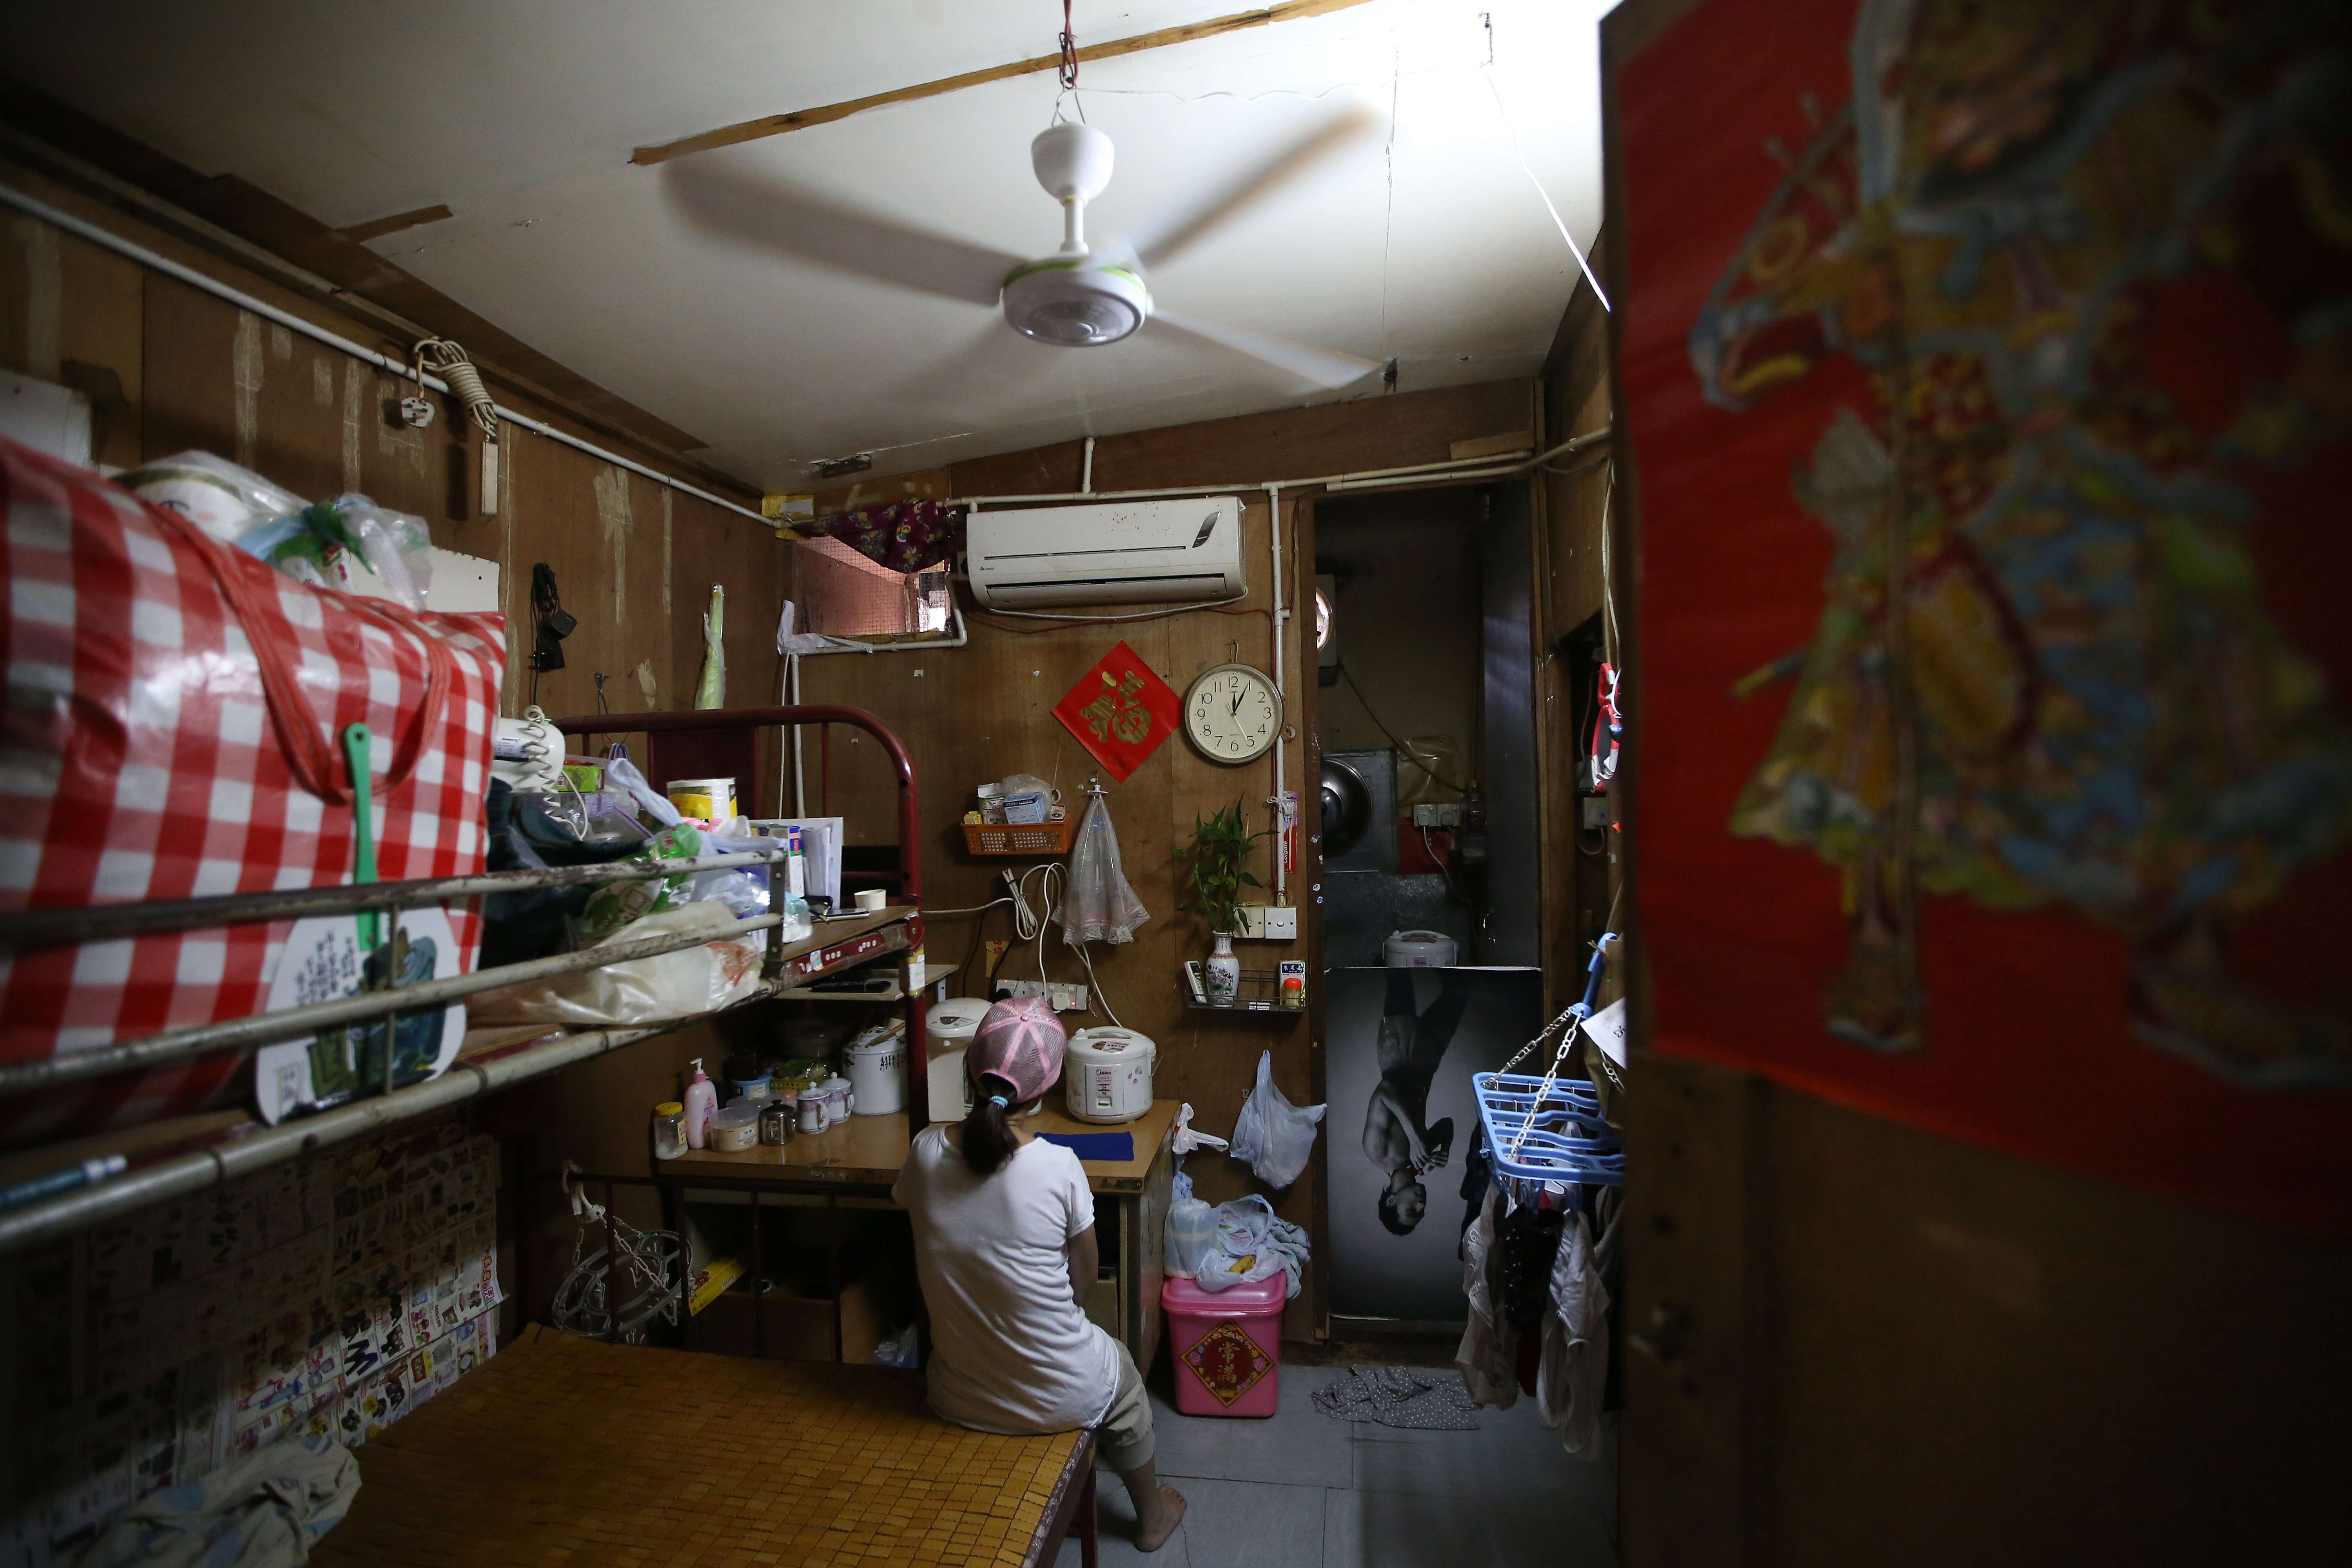 The rooftop shack in Kwun Tong that must be cleared by the end of the year. Photo: Sam Tsang